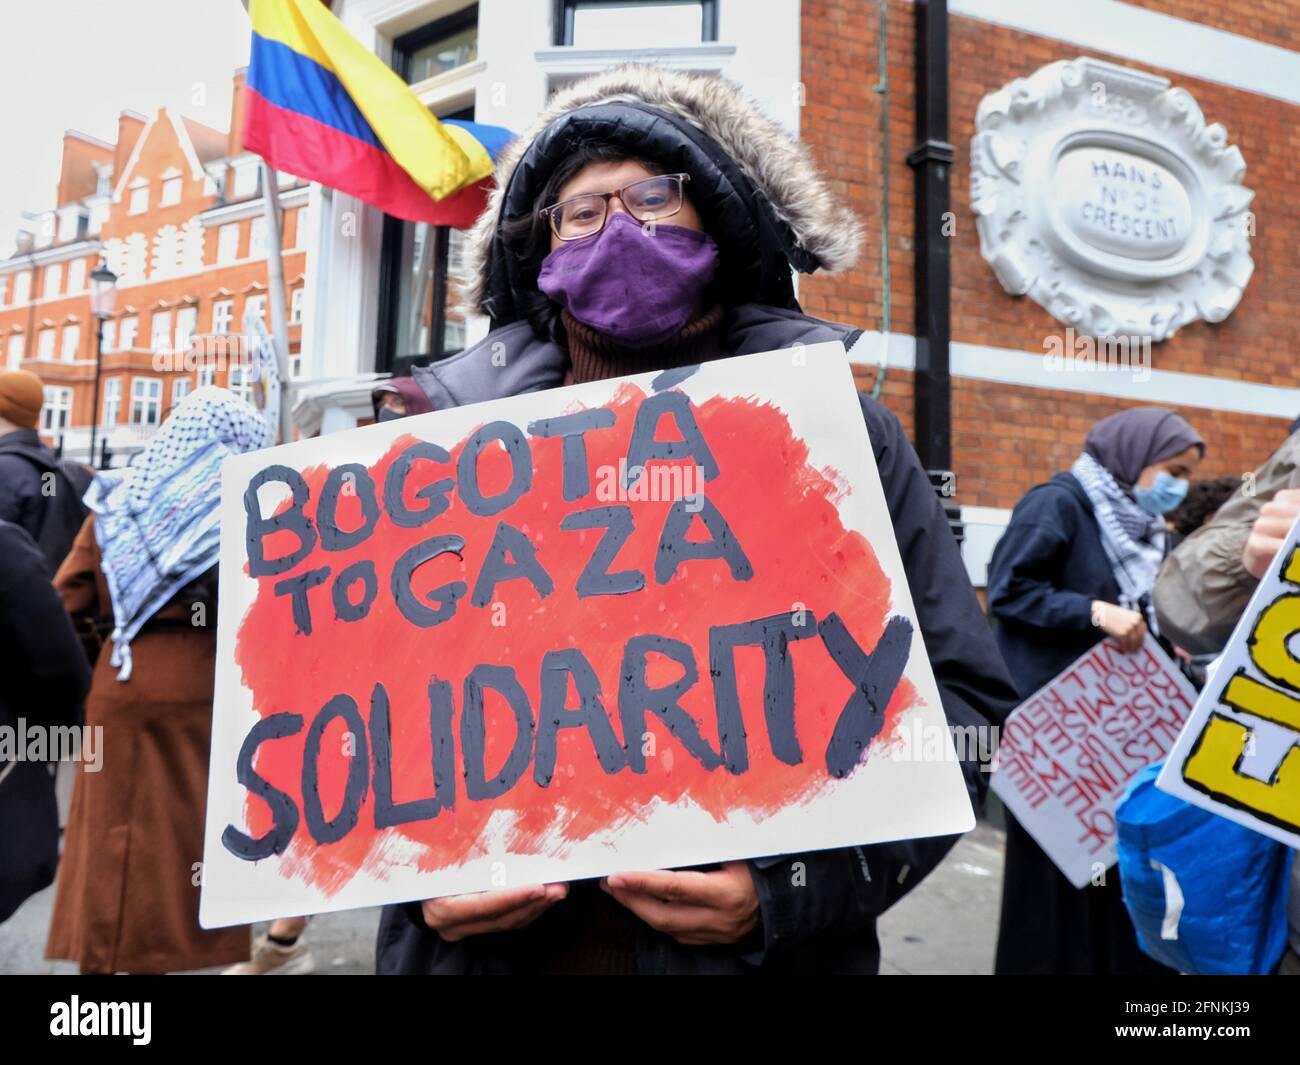 Colombian human rights supporters protest in solidarity with Palestinians as tensions rise in the Middle East. Stock Photo